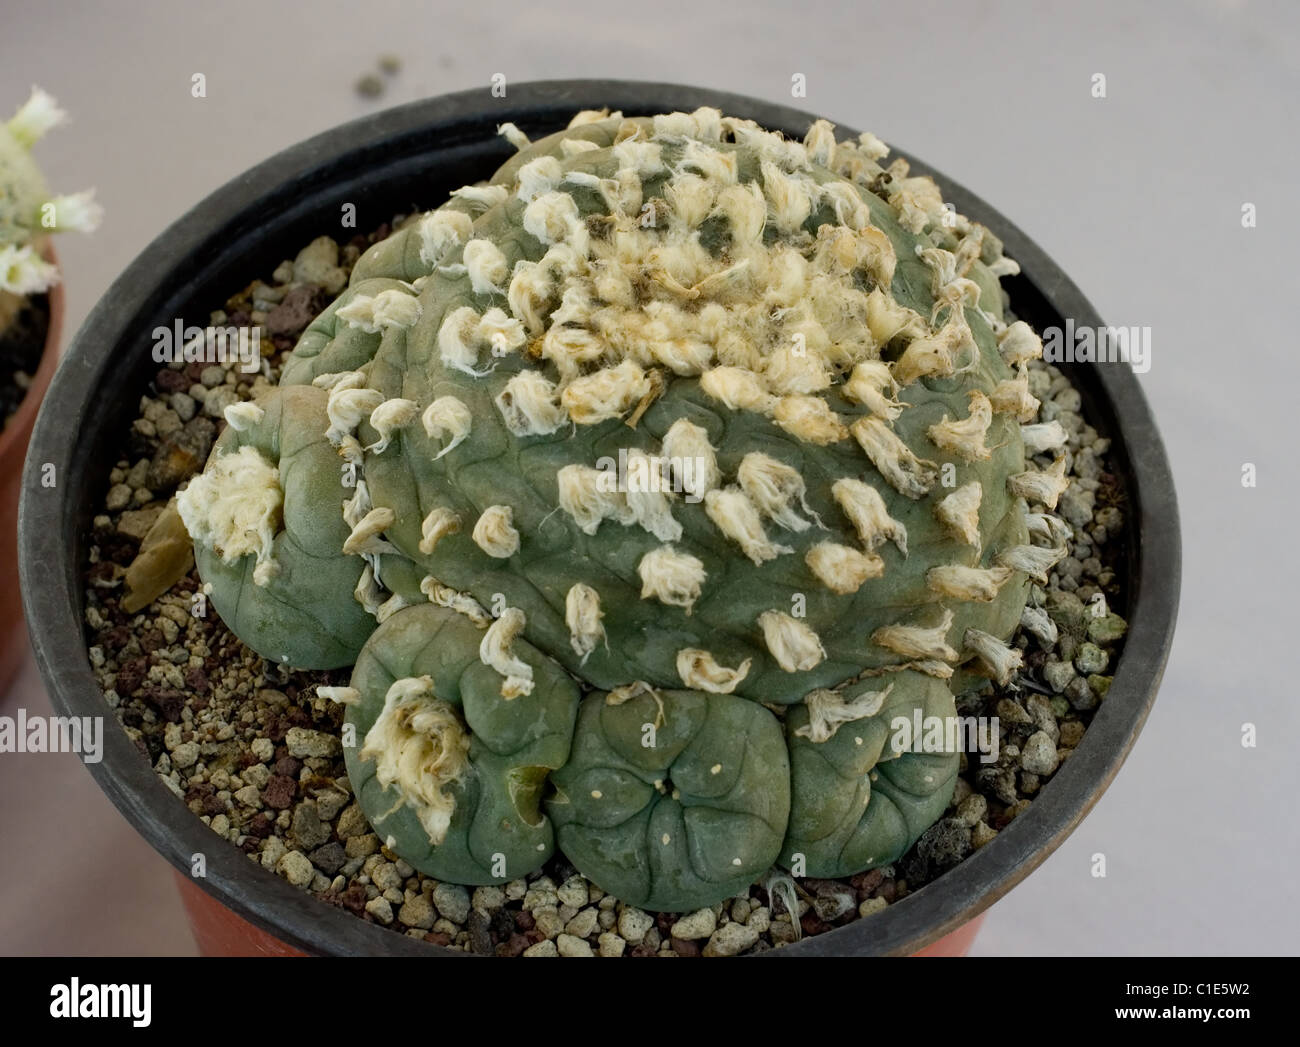 Peyote cactus (Lophophora williamsii) in a pot at a cactus exhibition in Mexico Stock Photo